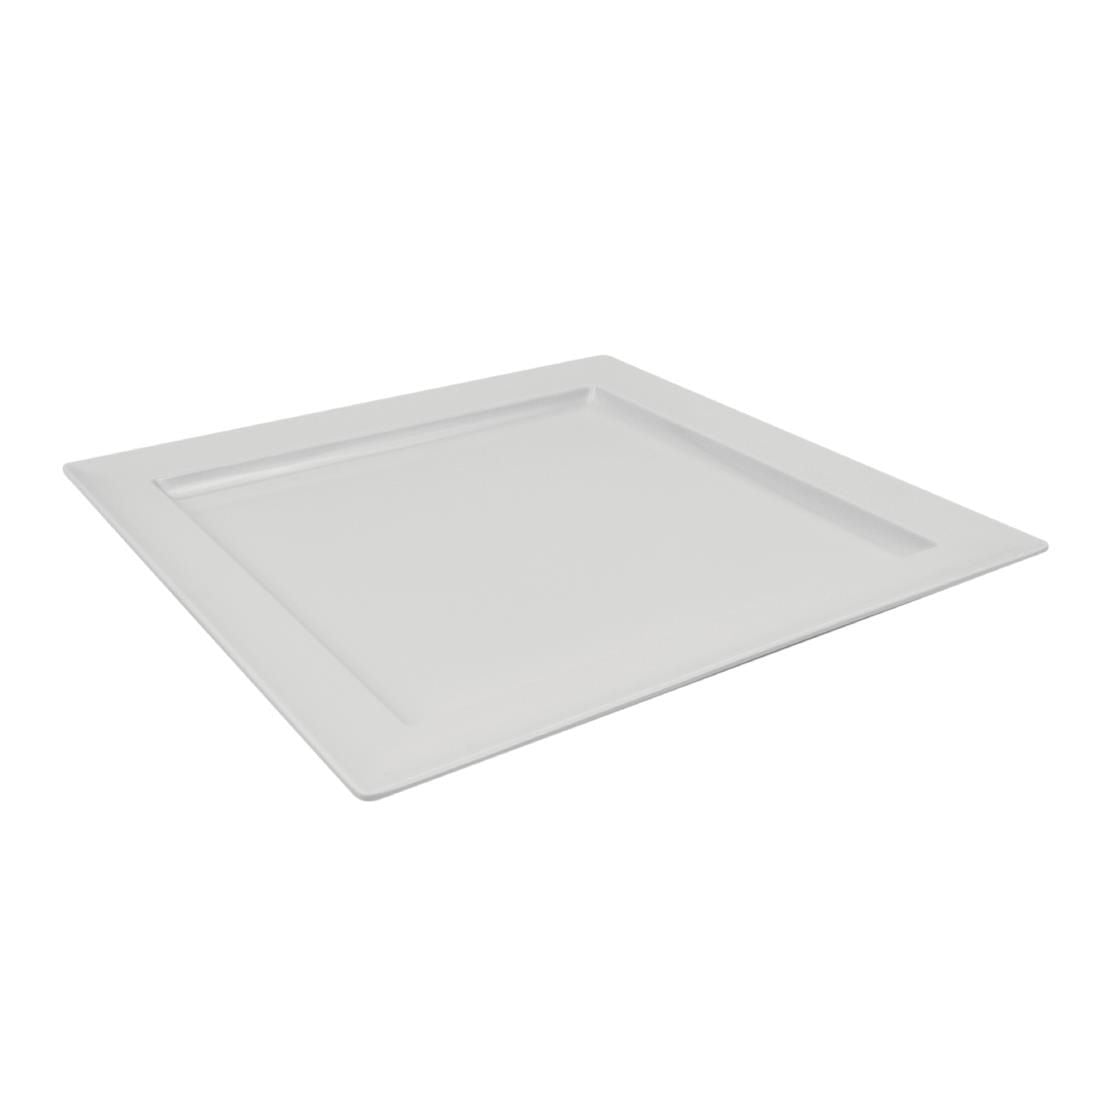 Dalebrook Melamine Square Dover Tray White 375mm JD Catering Equipment Solutions Ltd